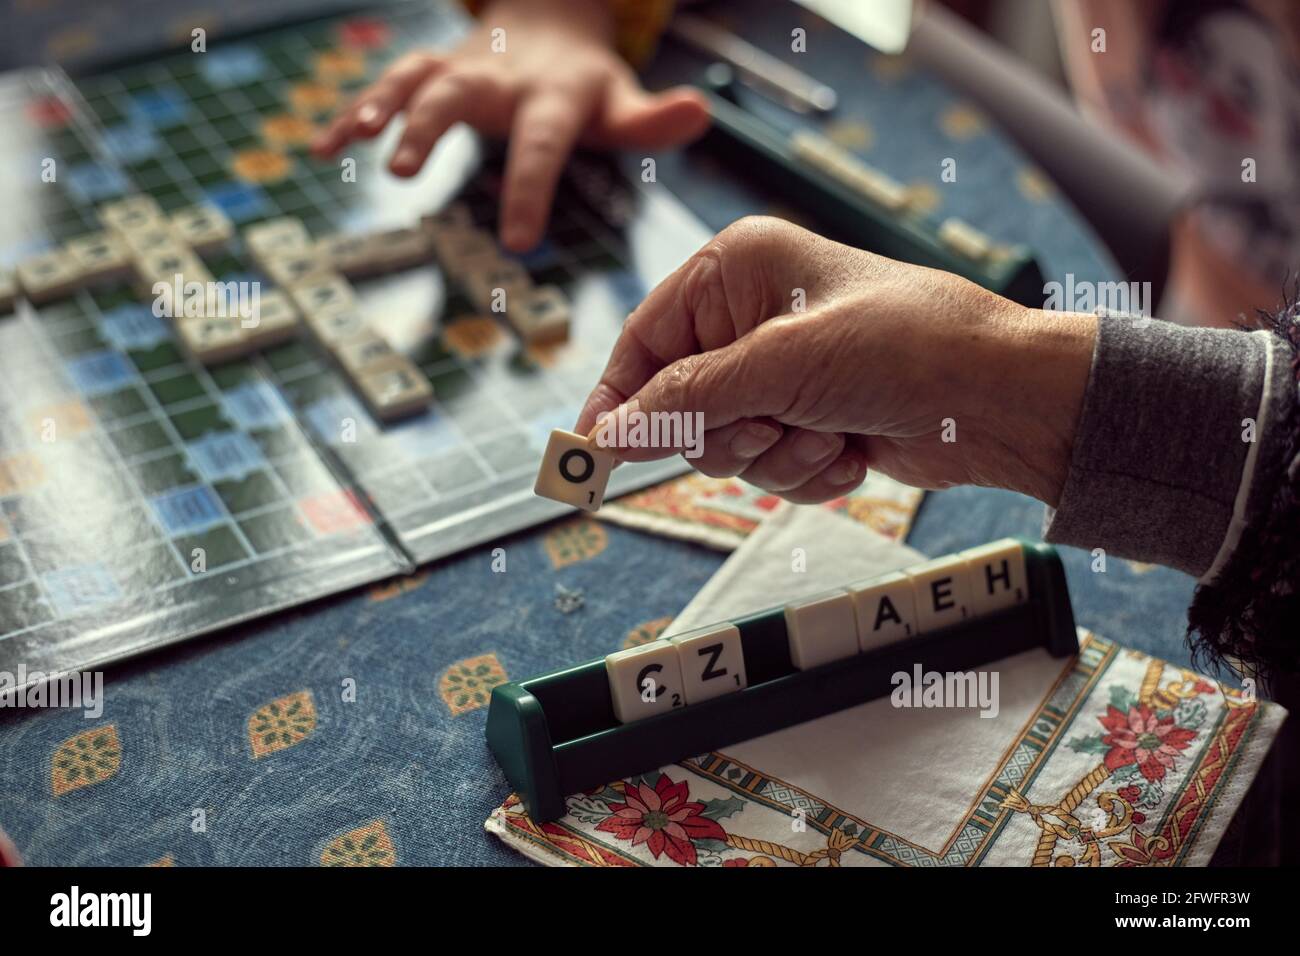 Mature hands with arthritis, playing letters game Stock Photo